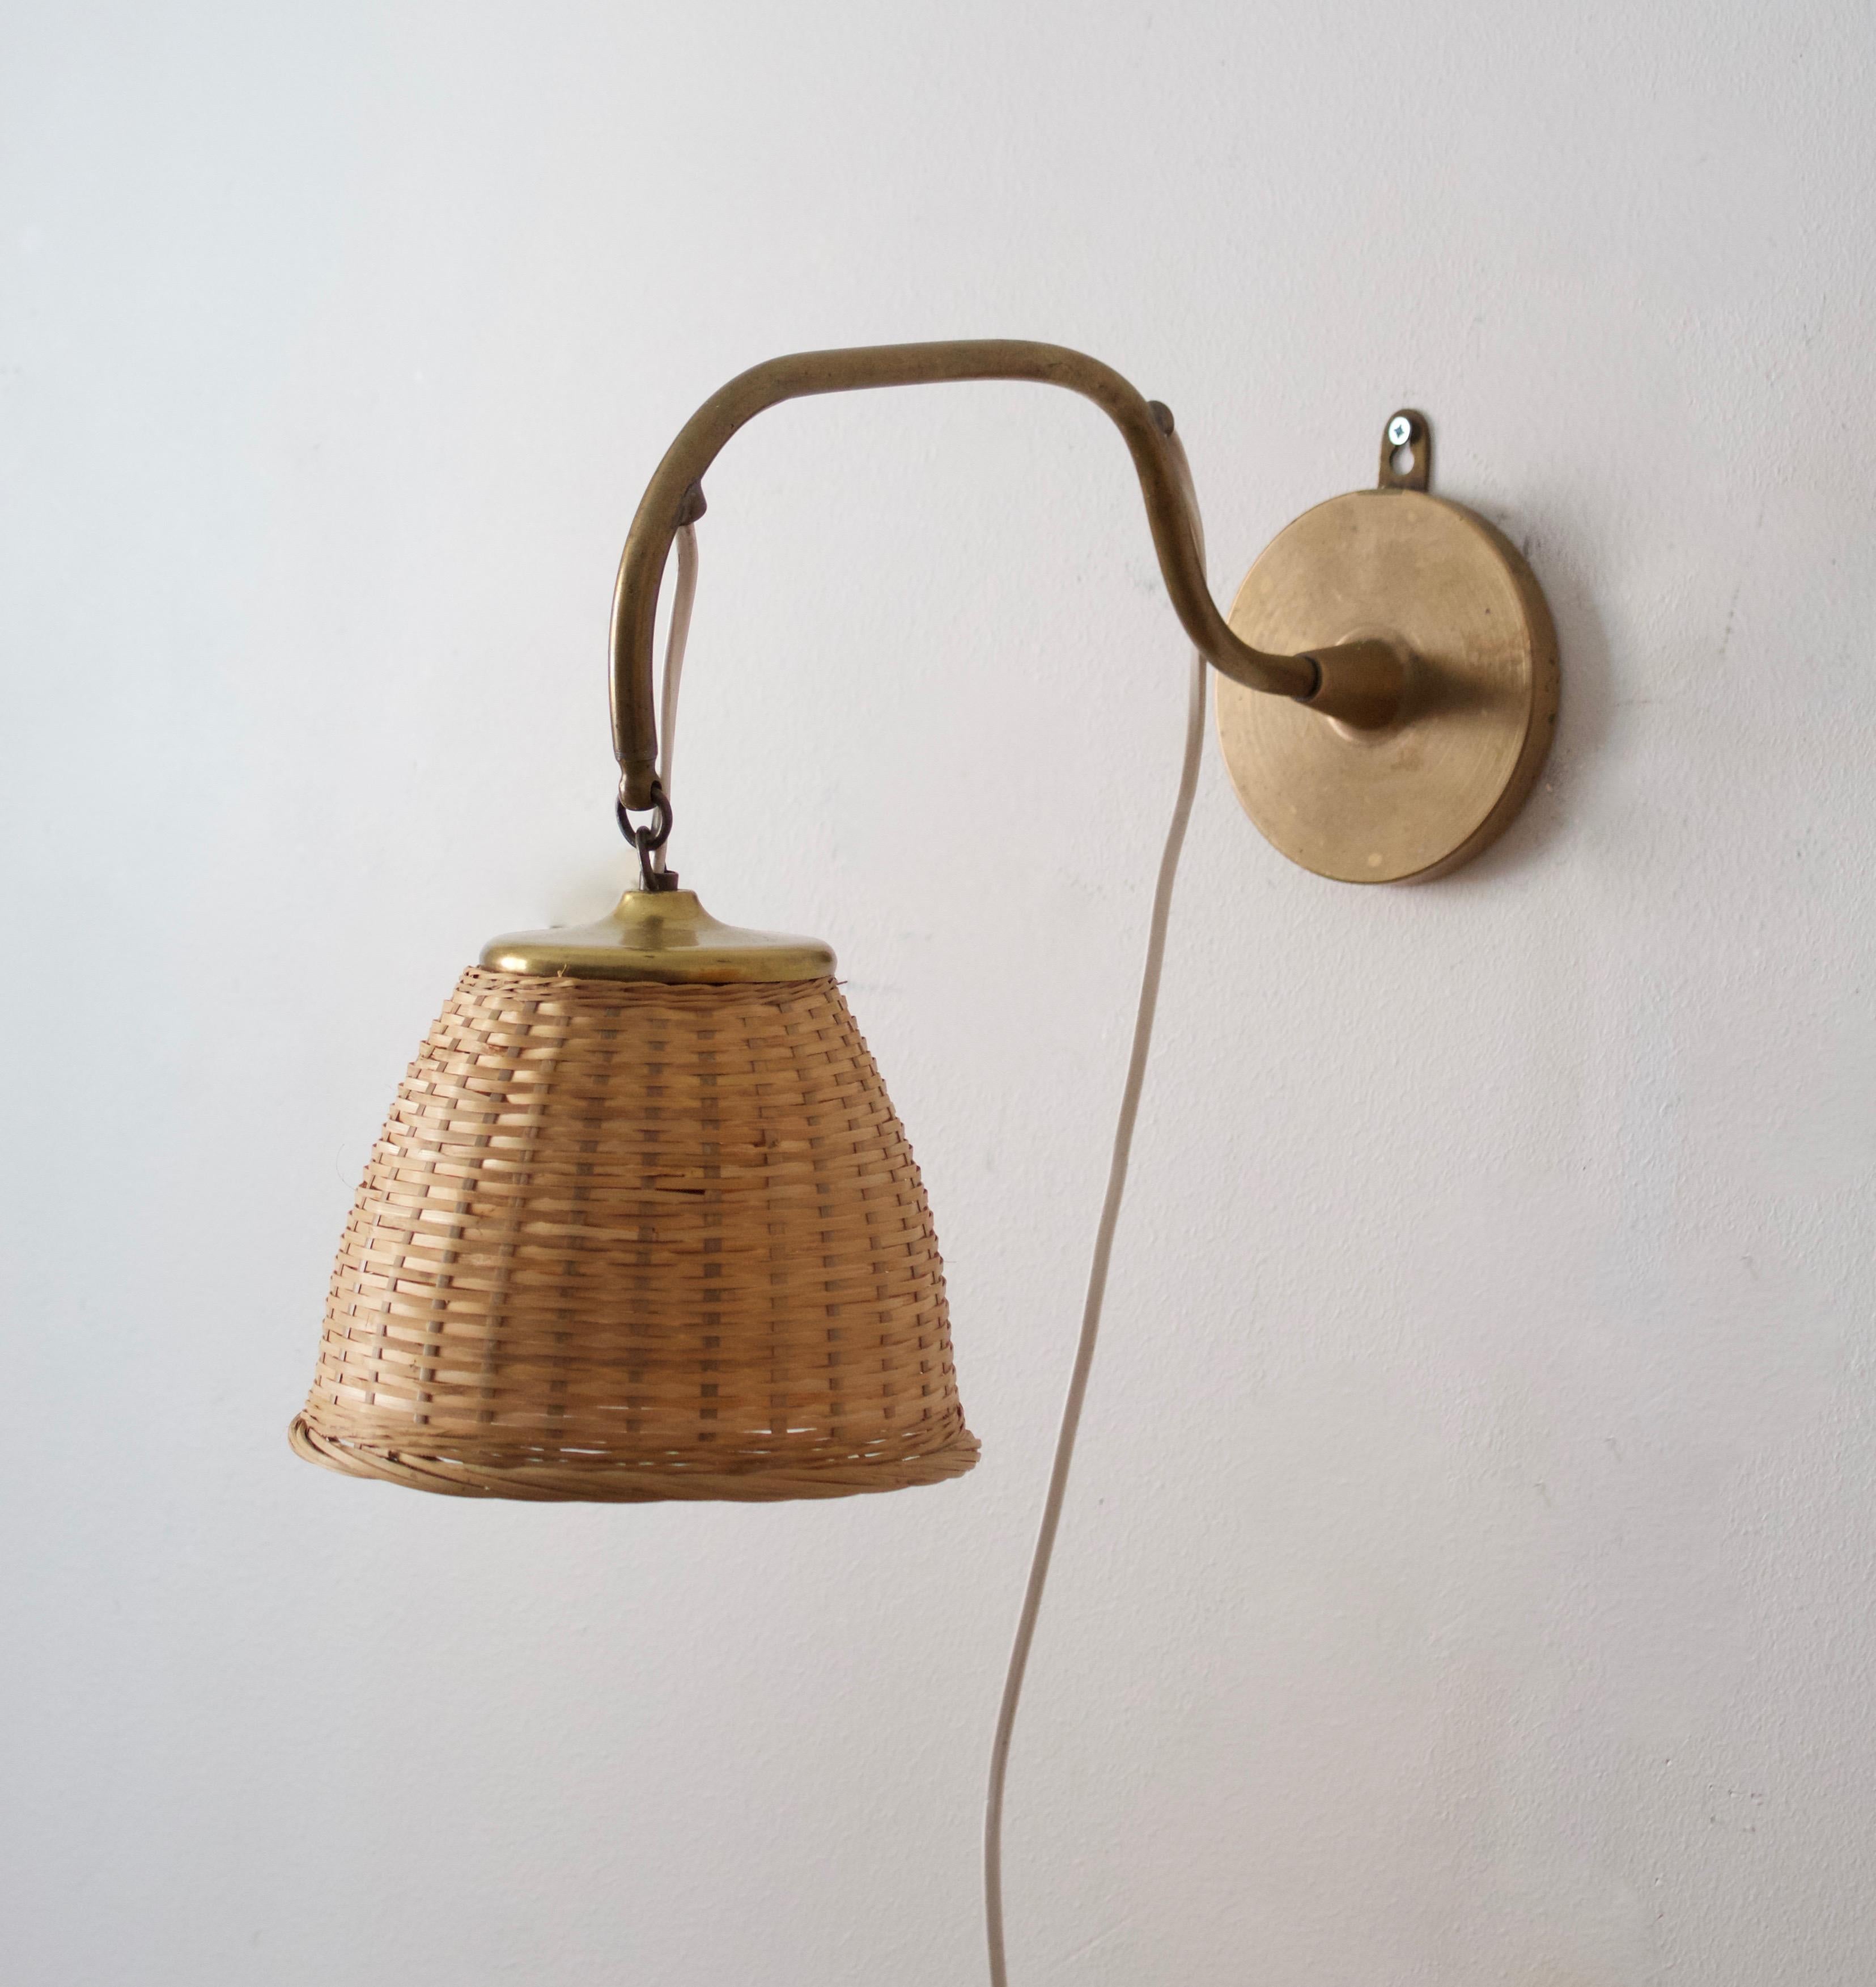 A functionalist wall light / task light, designed and produced in Sweden, 1922. Assorted Vintage rattan lampshade. Engraving to bottom. 

Stated dimensions with lampshade attached as is illustrated in the primary image.